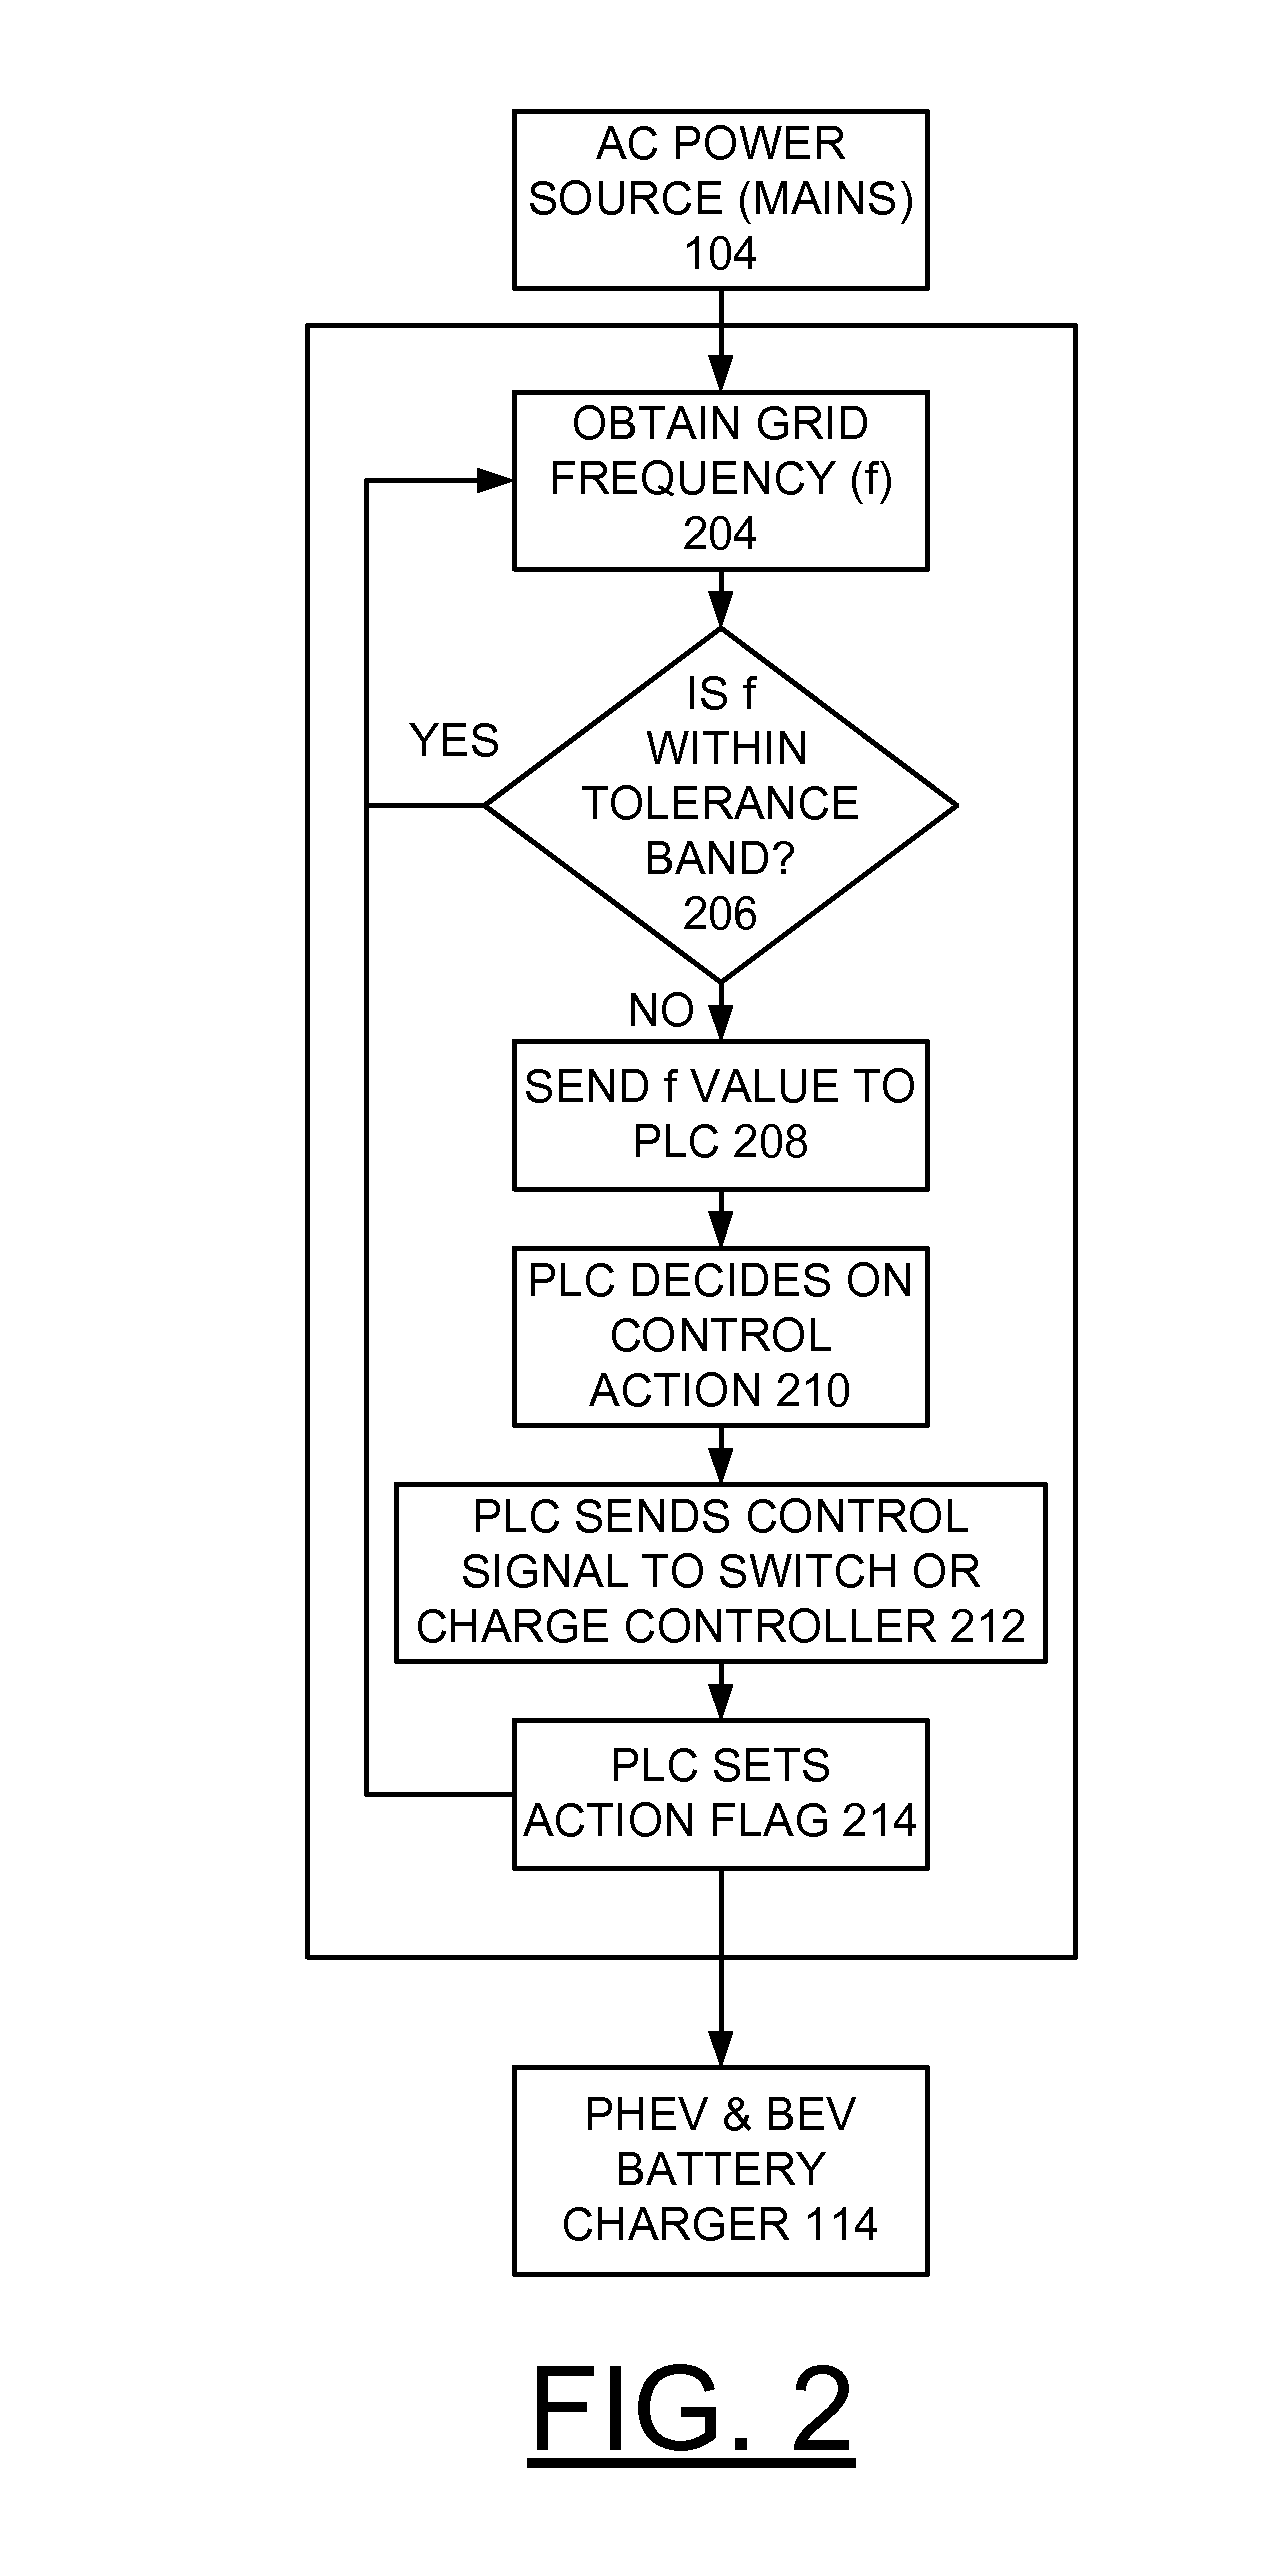 Frequency based electric vehicle charge controller system and method for implementing demand response and regulation services to power grid using frequency detection